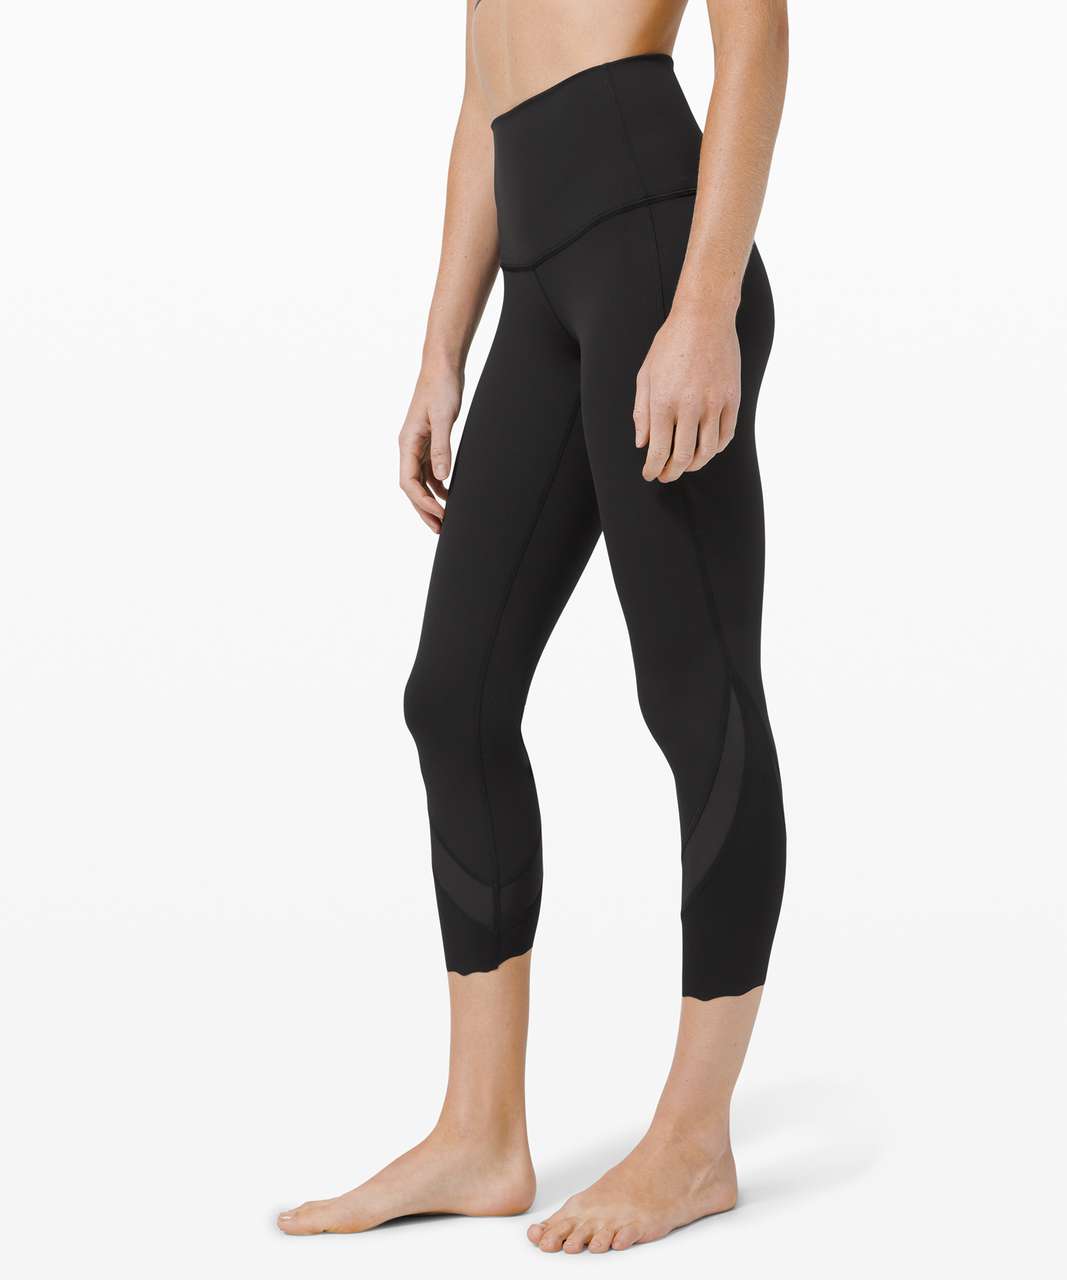 Lululemon Wunder Under Crop High-Rise *Roll Down Scallop Full-On Luxtreme 23" - Black